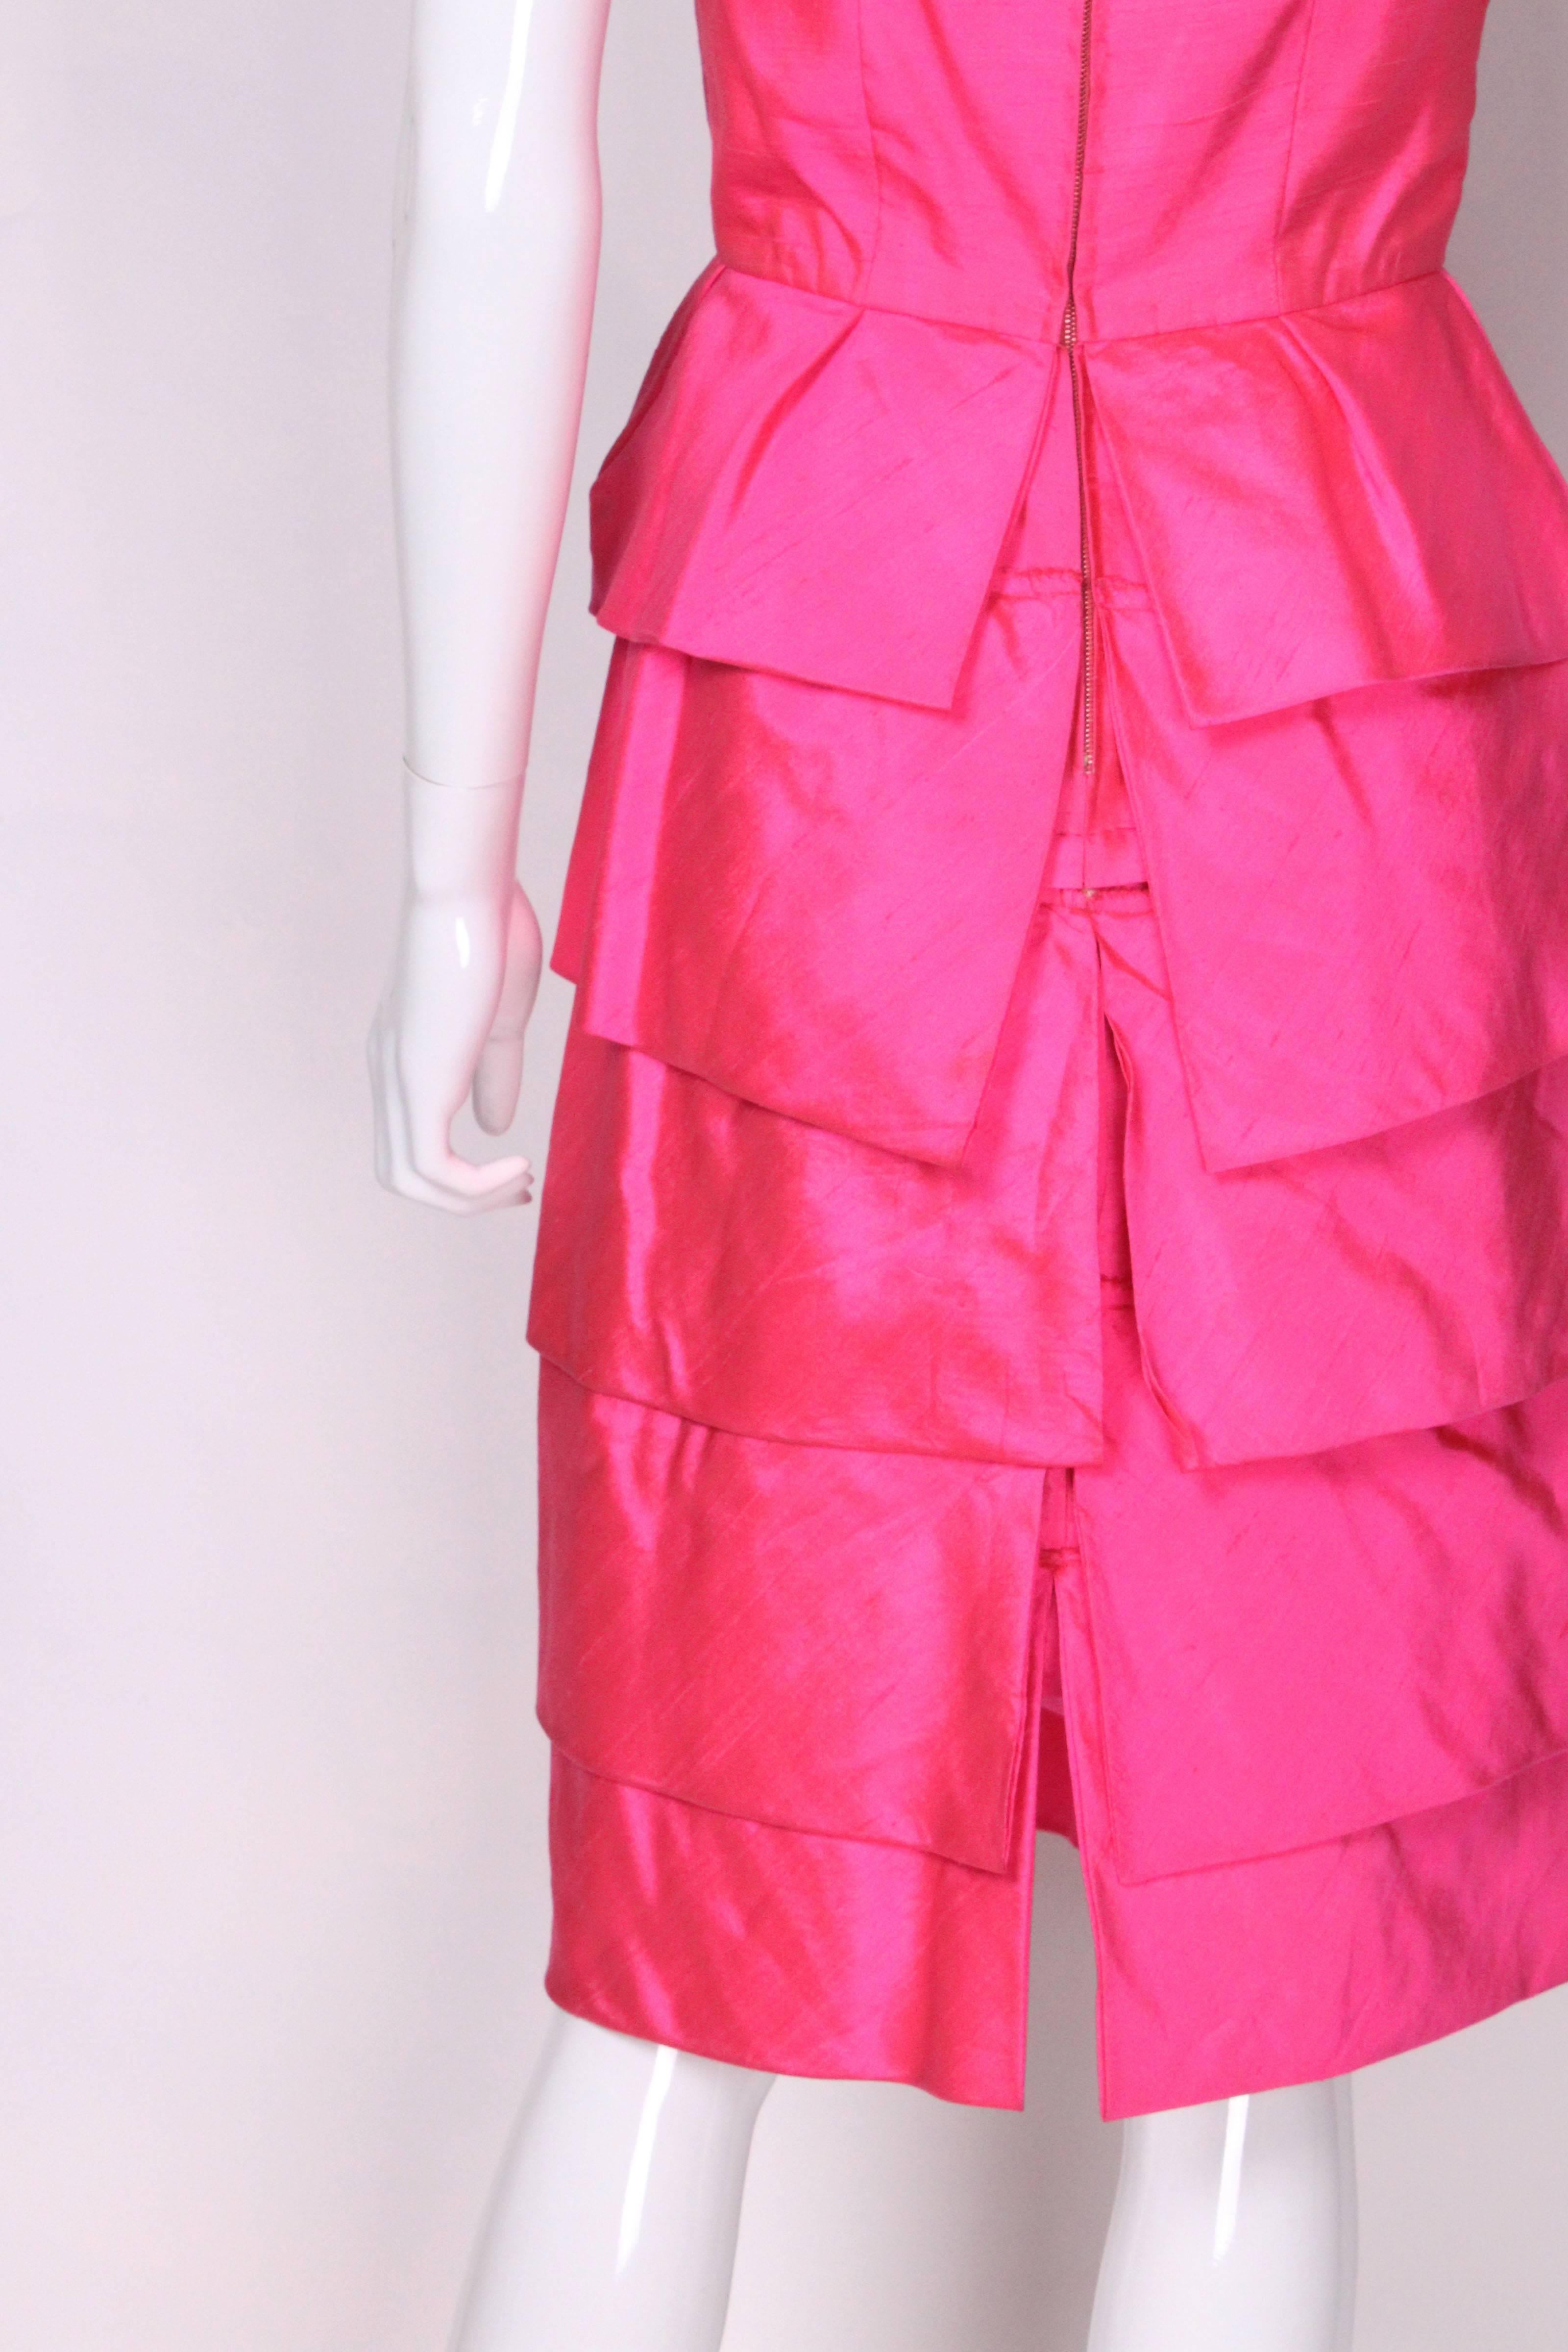 Women's Vintage Bright Pink Raw Silk Cocktail Dress For Sale